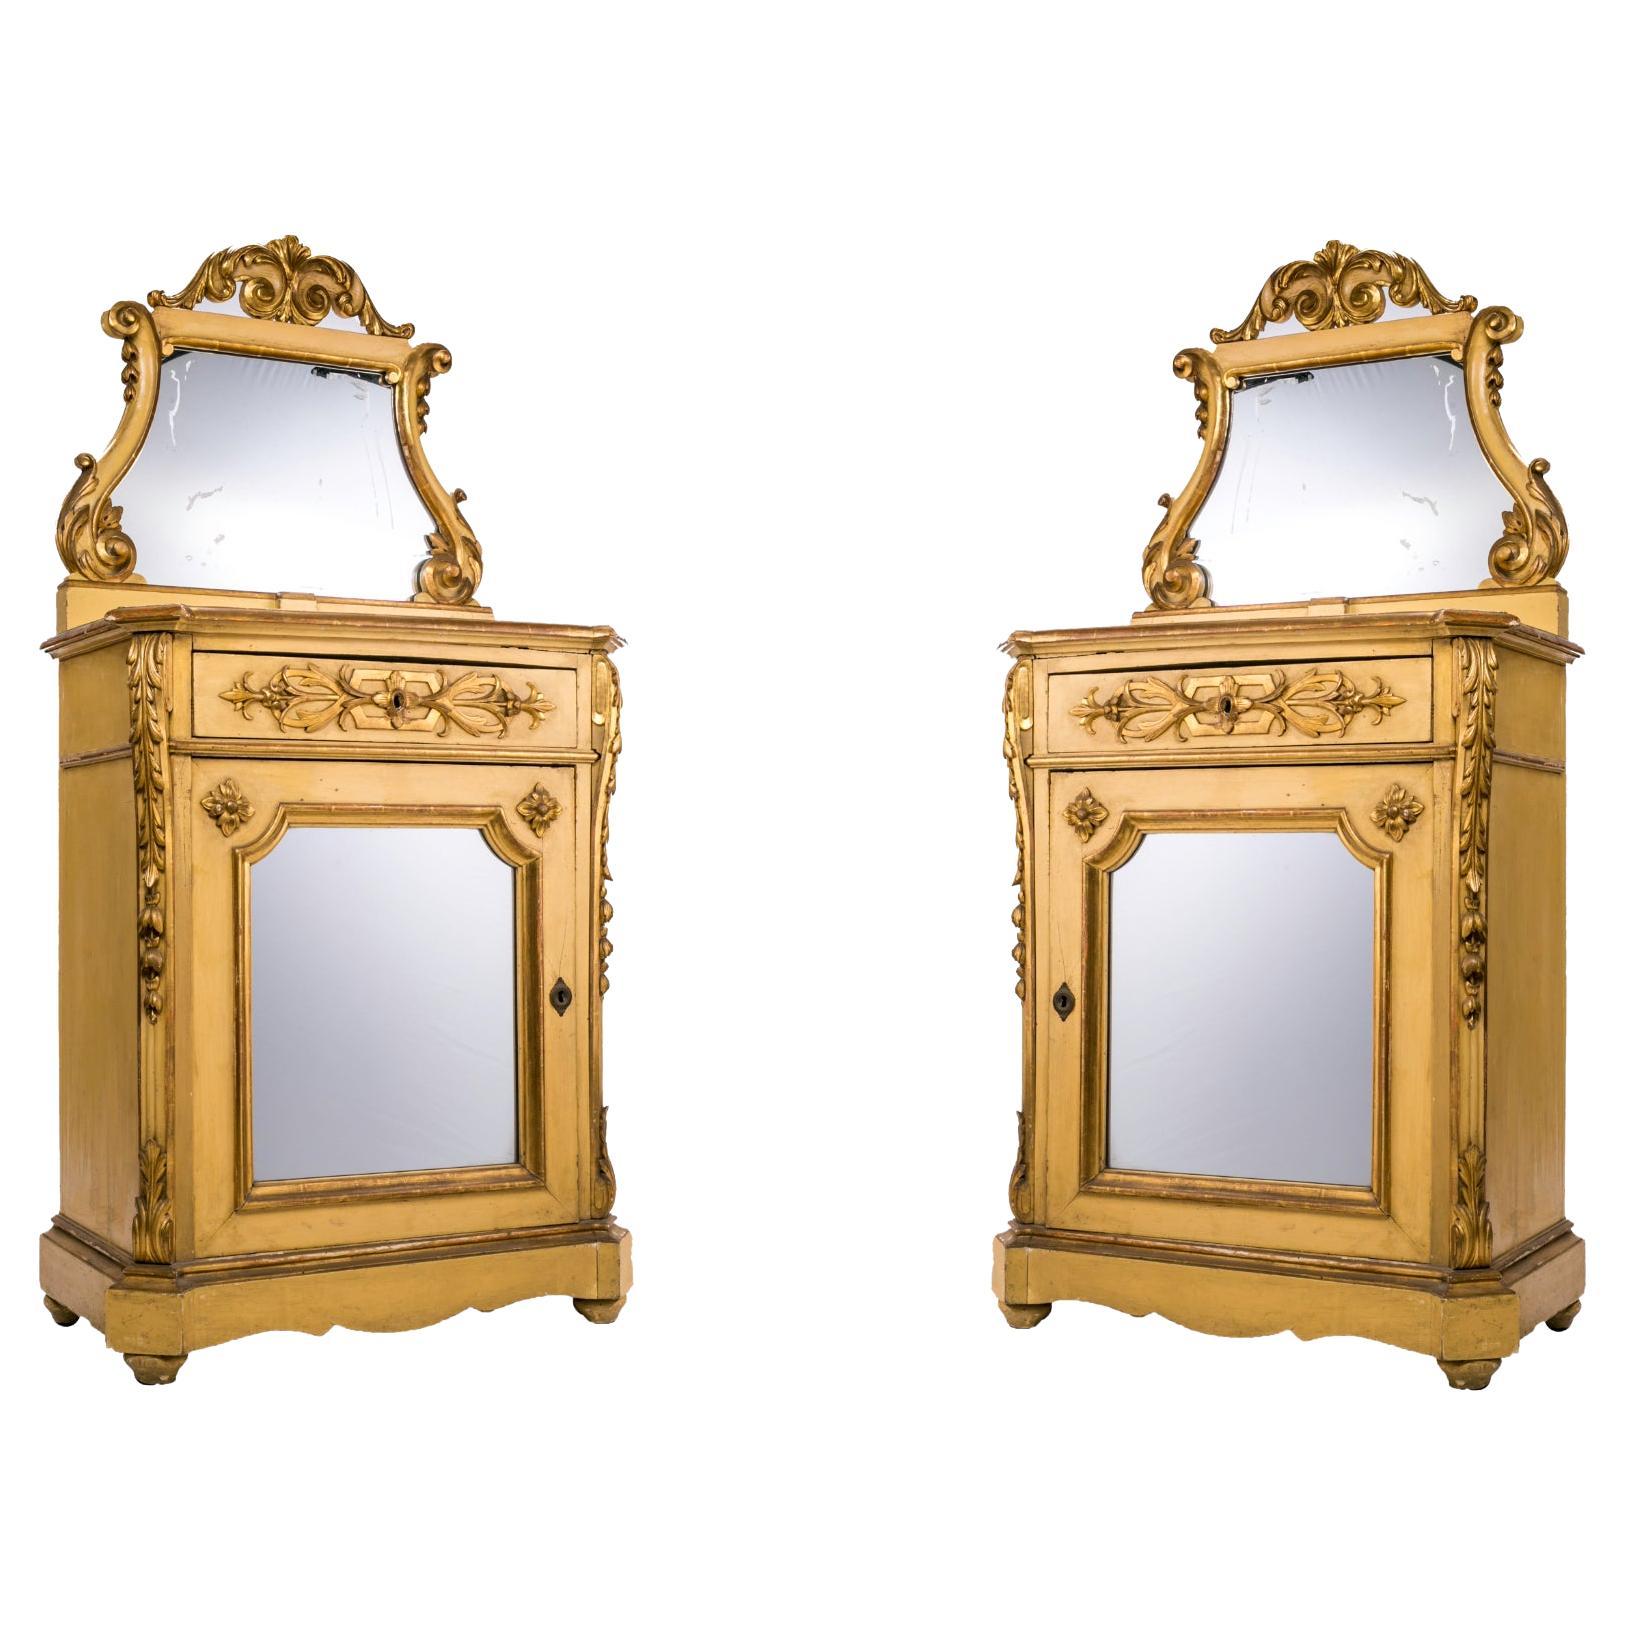 Pair of elegant lacquered cabinets from the mid-19th century